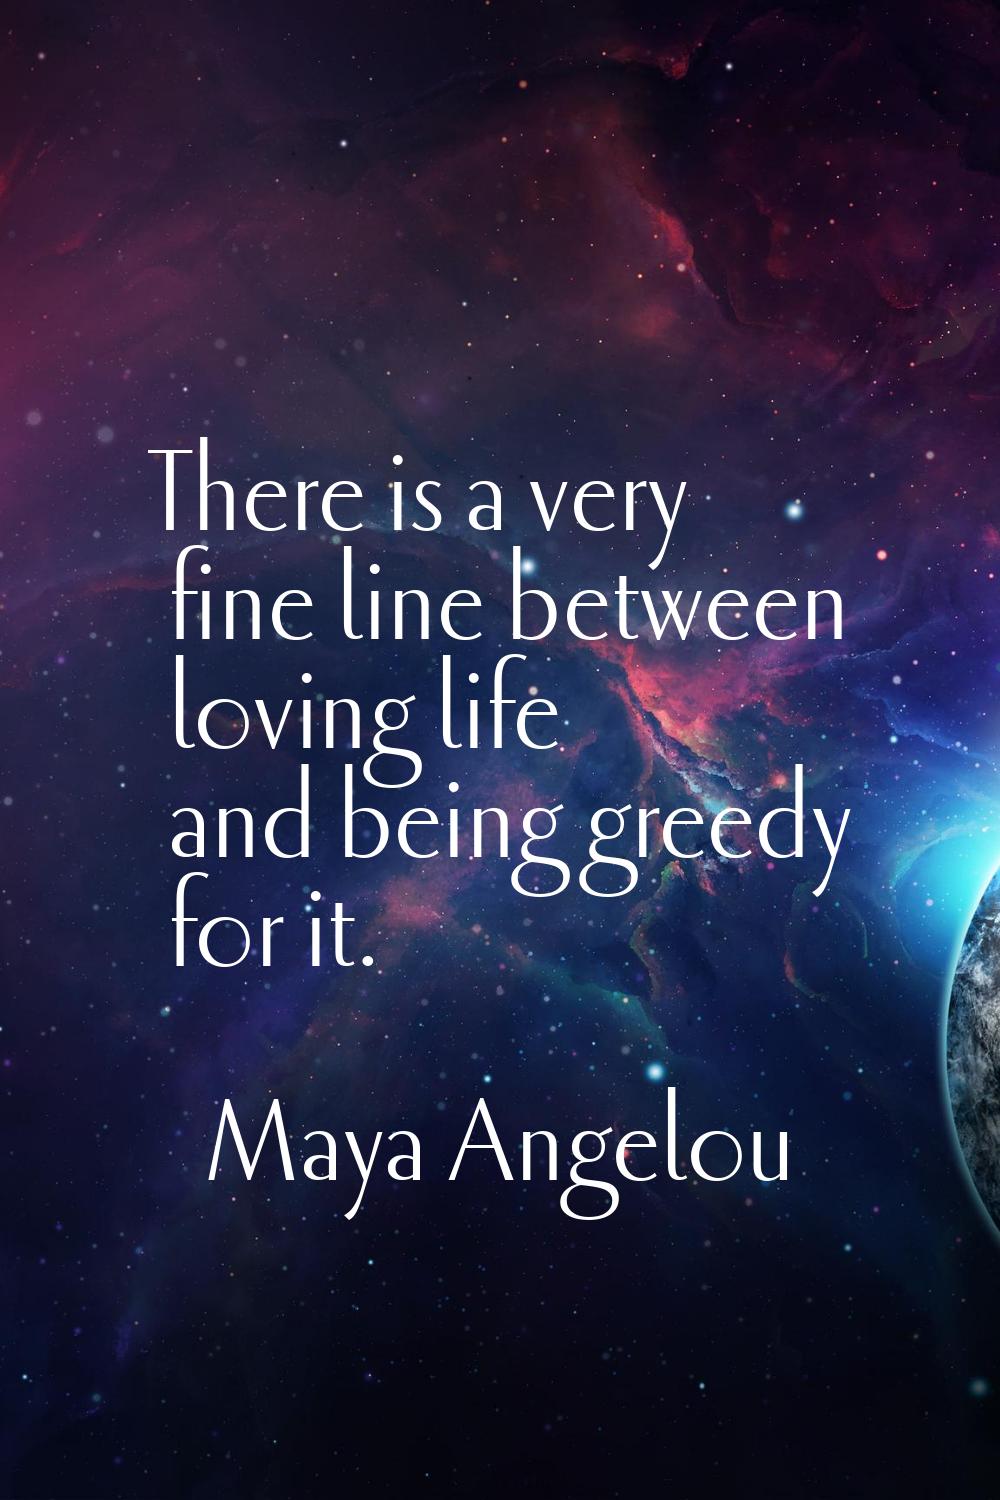 There is a very fine line between loving life and being greedy for it.